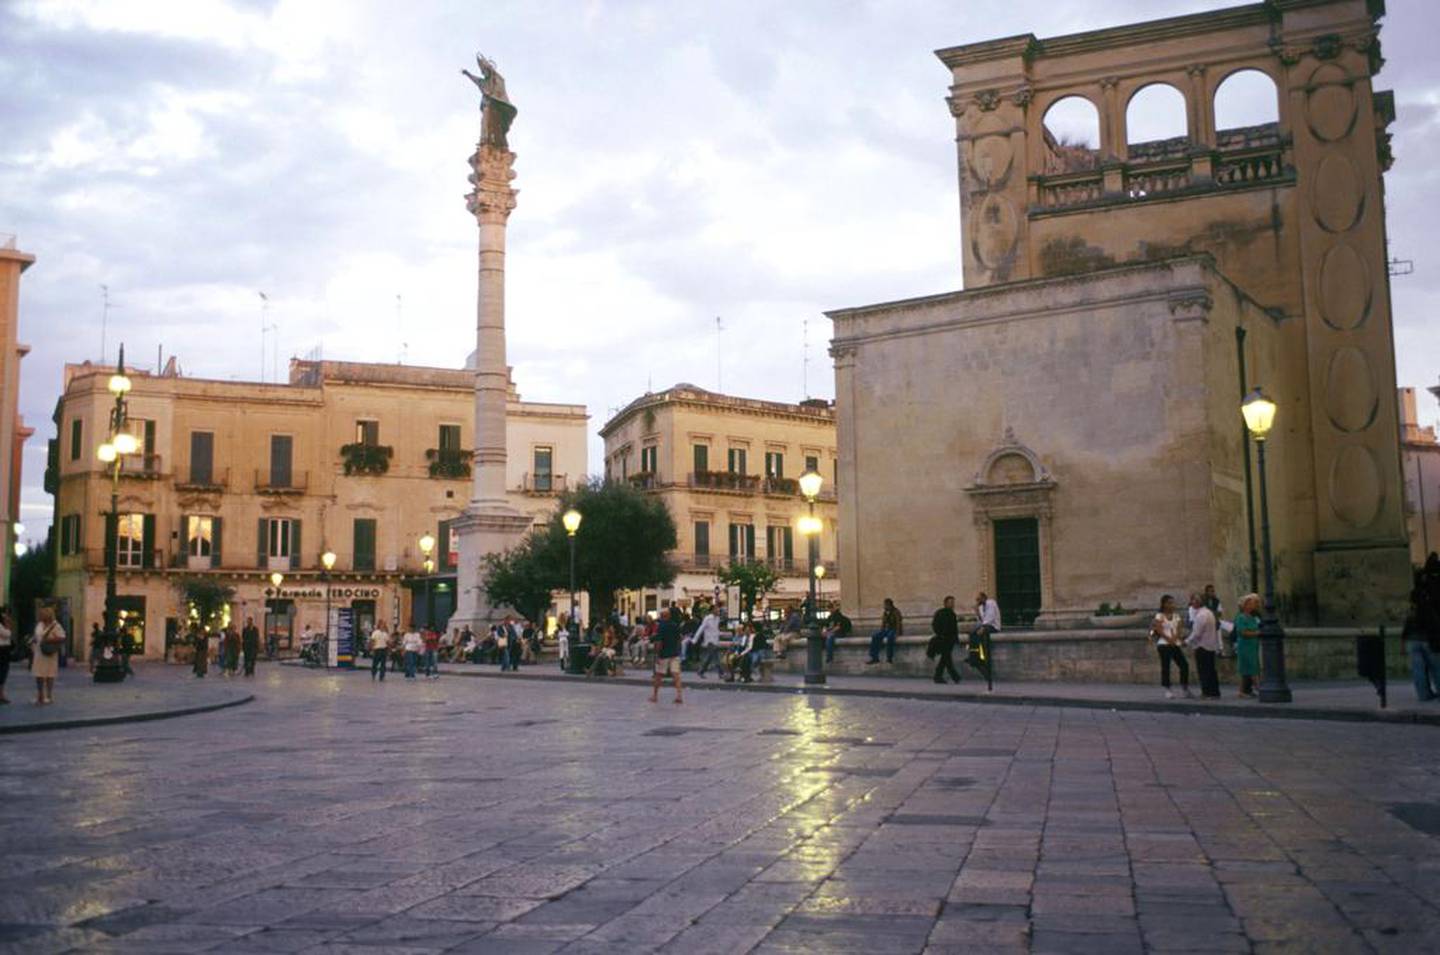 The centre of Lecce is characterised by cobbled streets and plenty of perfectly preserved Baroque architecture. Zumapress.com